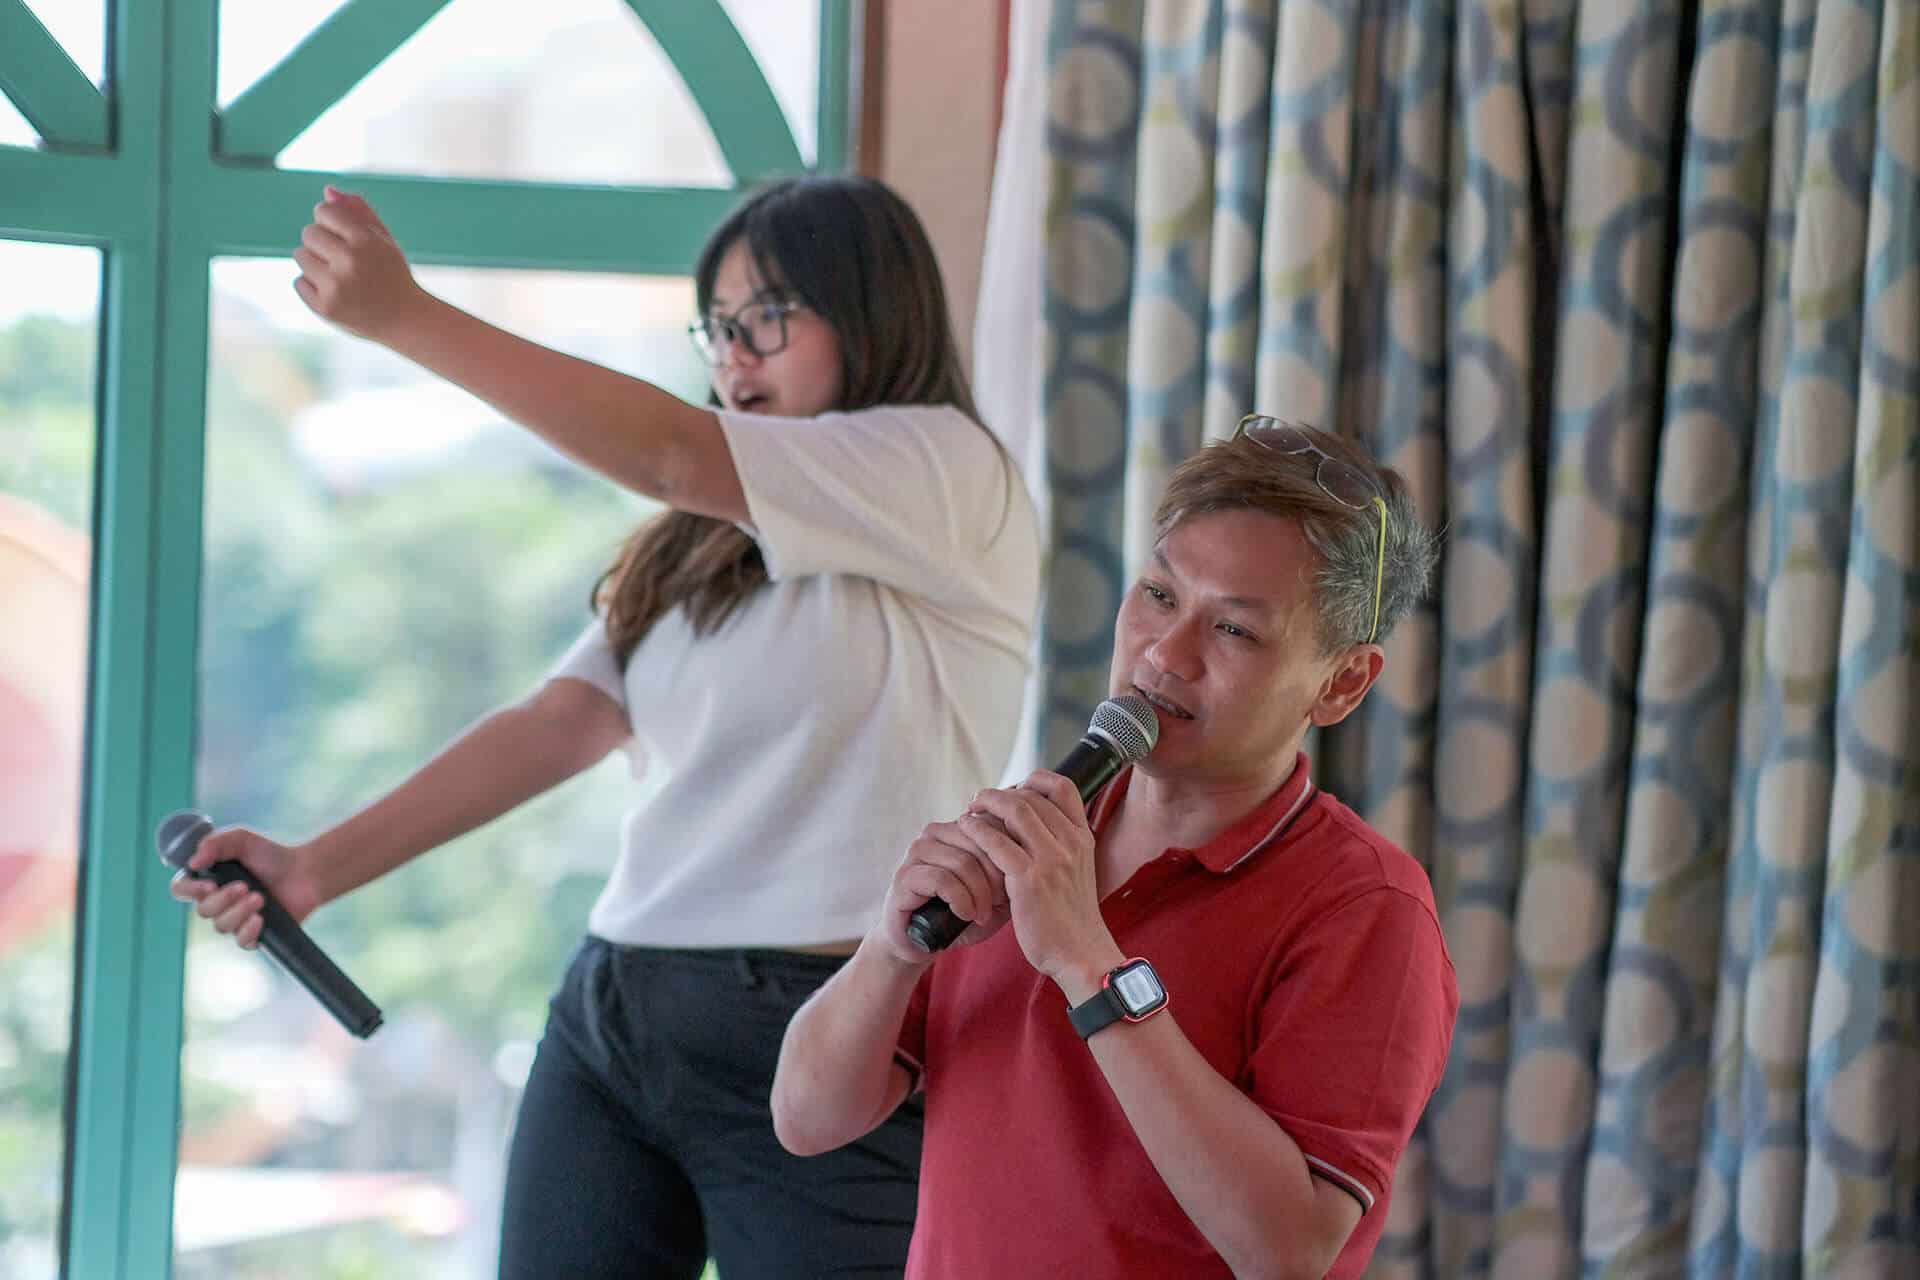 Do you know your dad’s go-to karaoke tunes?